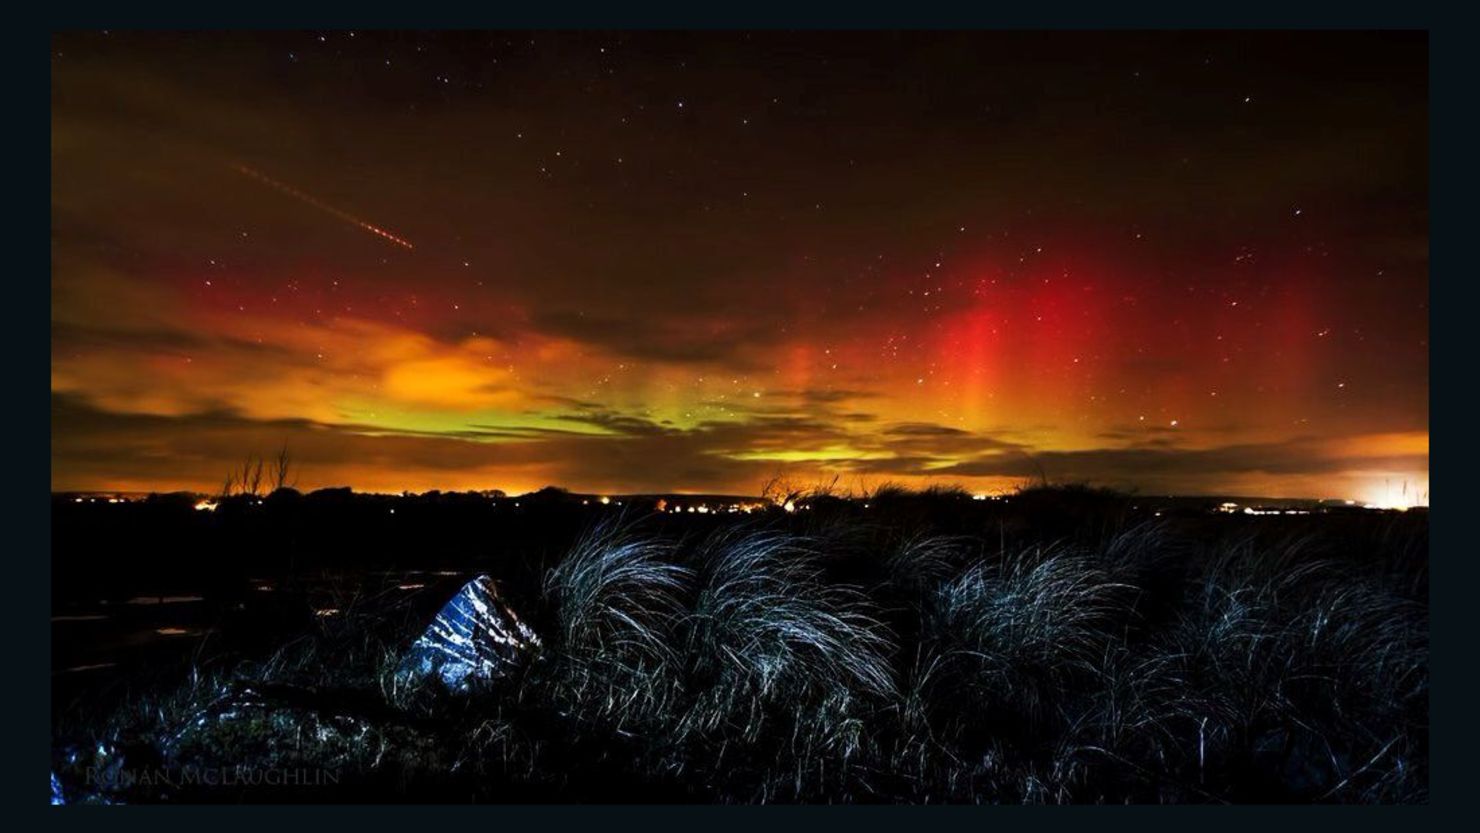 The Aurora Borealis painted British skies with shades of green, blue, and purple